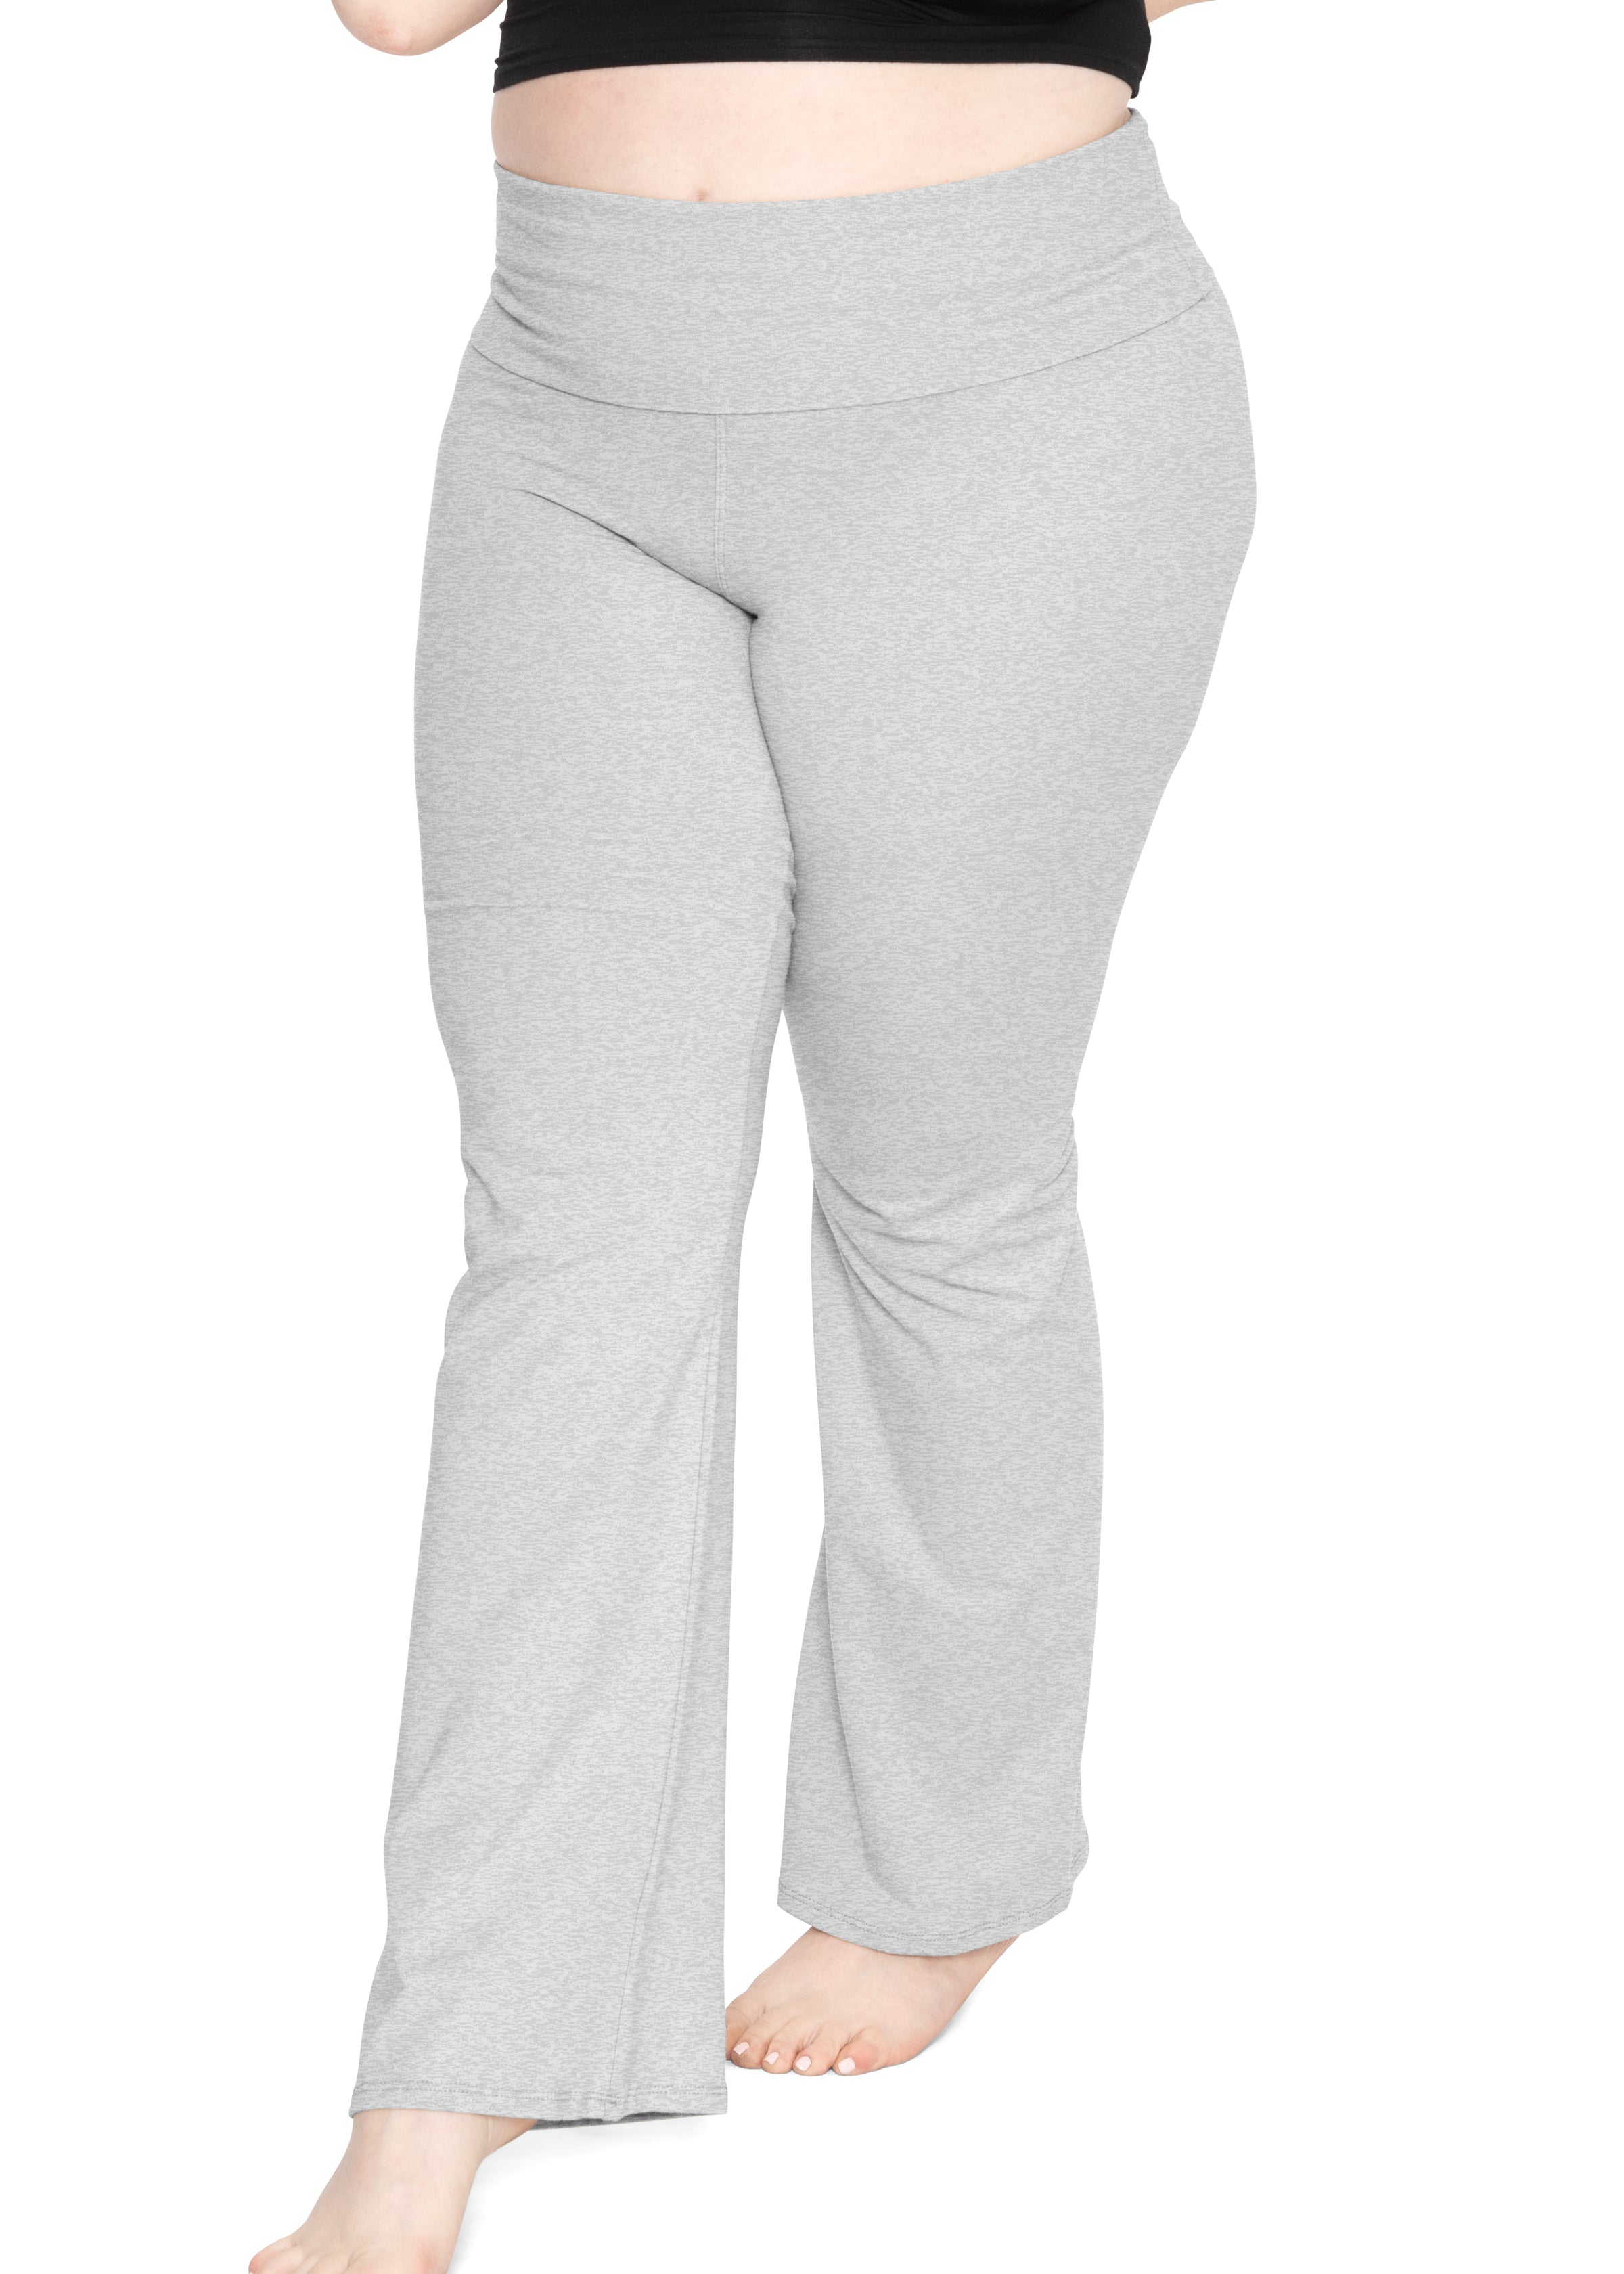 nsendm And Five Training Women's Drying Quick Fitness Yoga PantsTight Point  Pants plus Size Petite Yoga Pants for Women 3x Pants Grey Small 